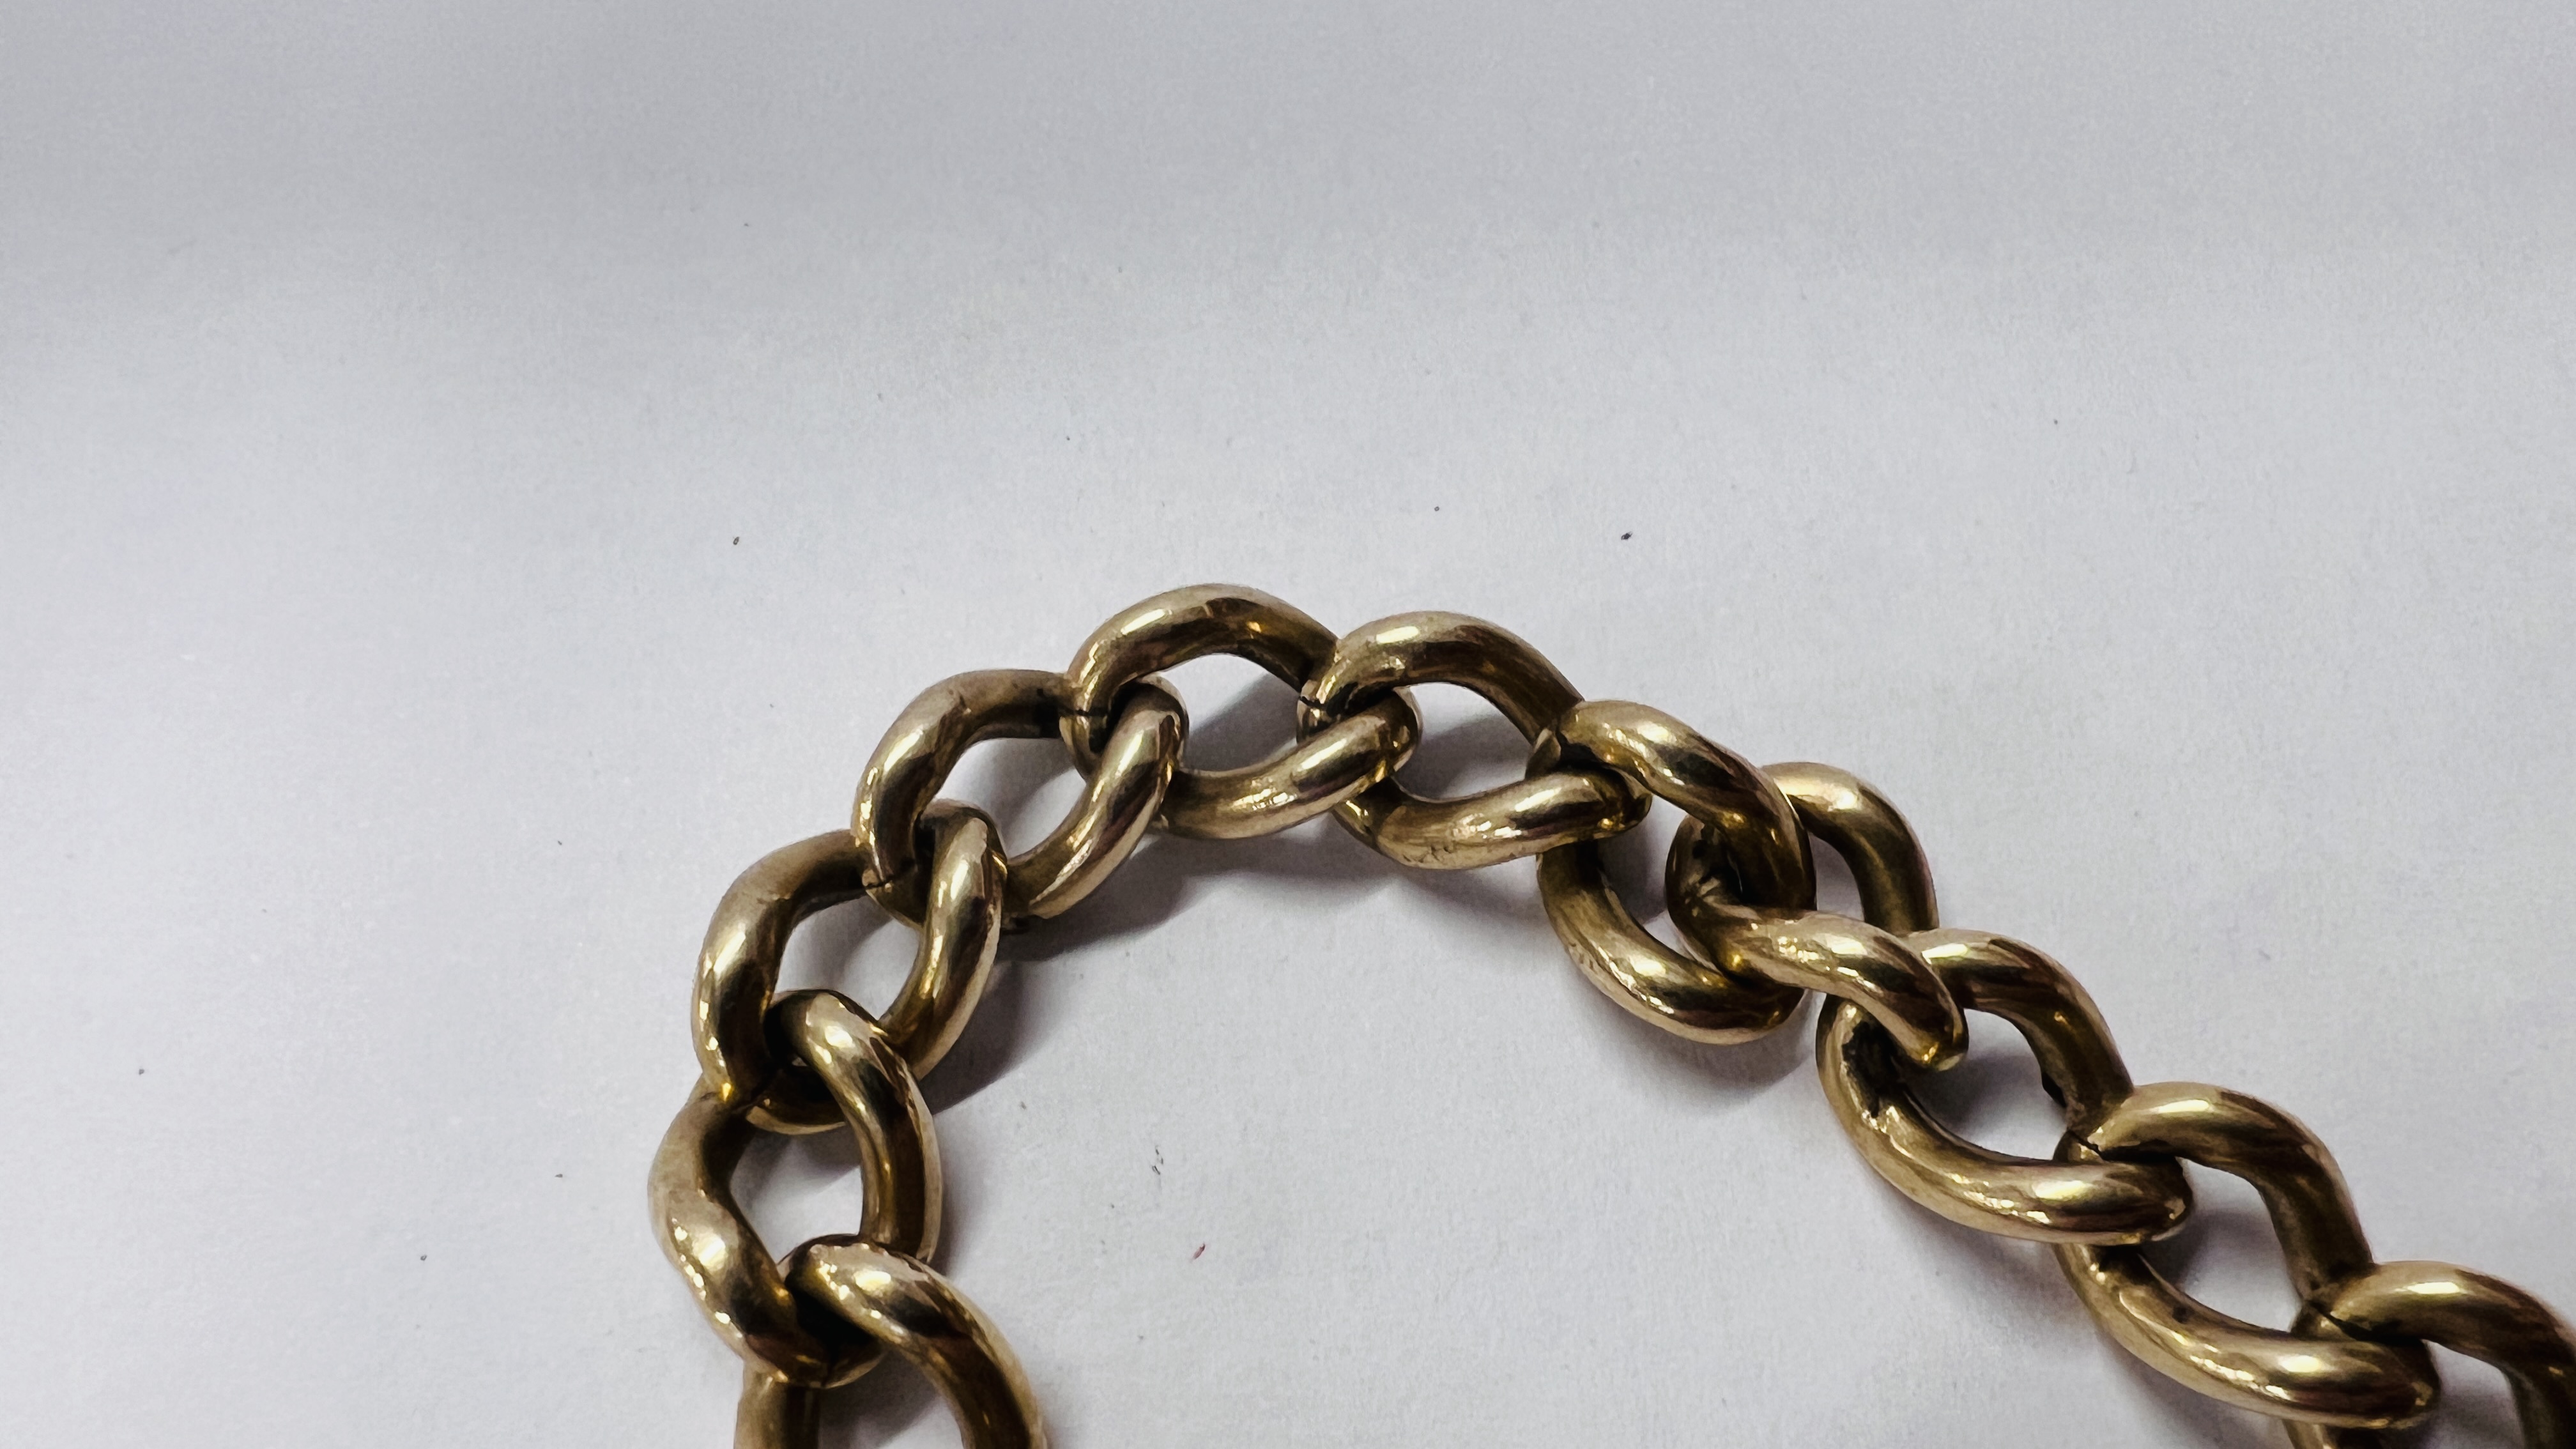 A 9CT GOLD BRACELET WITH PADLOCK CLASP. - Image 4 of 8